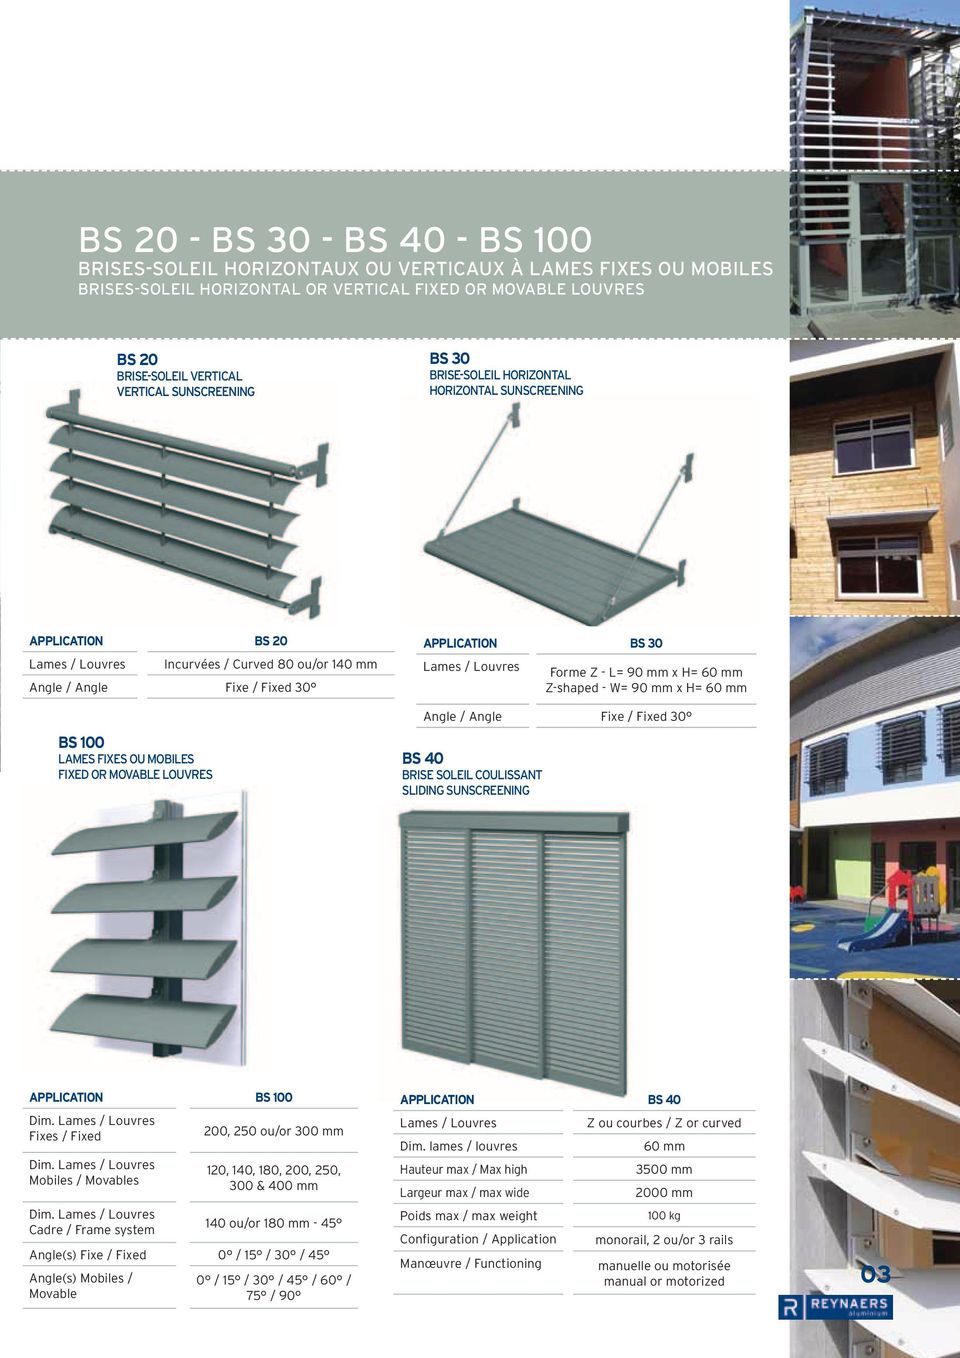 louvres Application BS 30 Forme Z - L= 90 mm x H= 60 mm Z-shaped - W= 90 mm x H= 60 mm Angle / Angle Fixe / Fixed 30 BS 40 brise soleil coulissant sliding sunscreening Application bs 100 Dim.